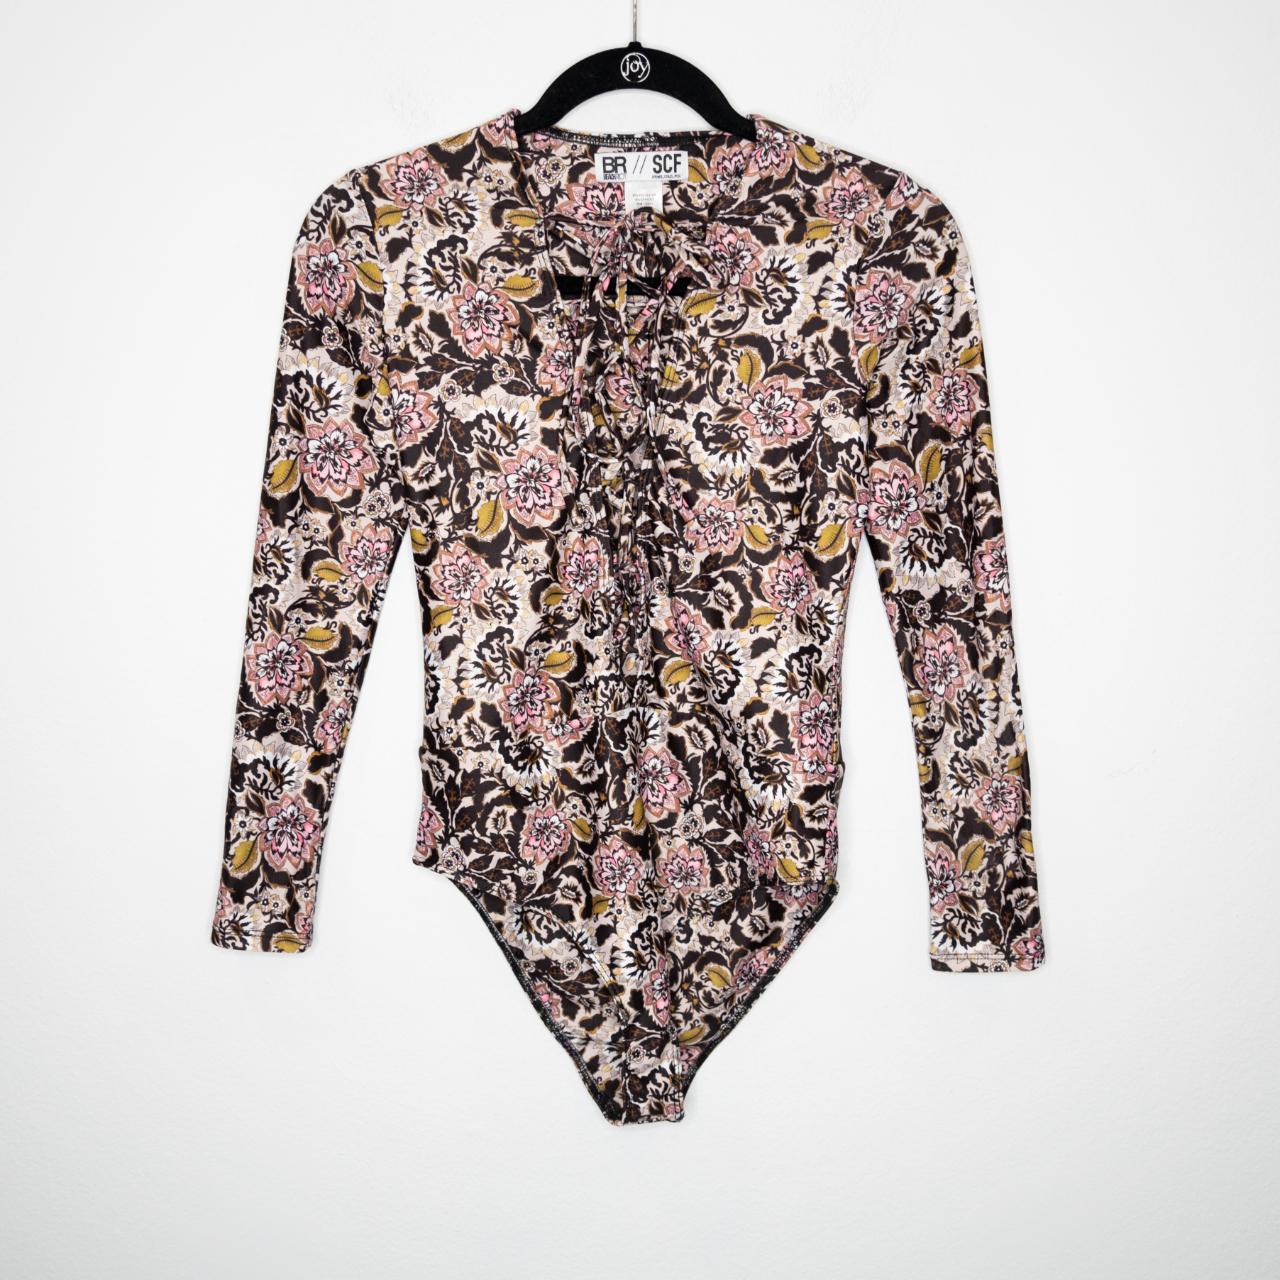 Product Image 1 - Poppy Rash Guard Swimsuit from